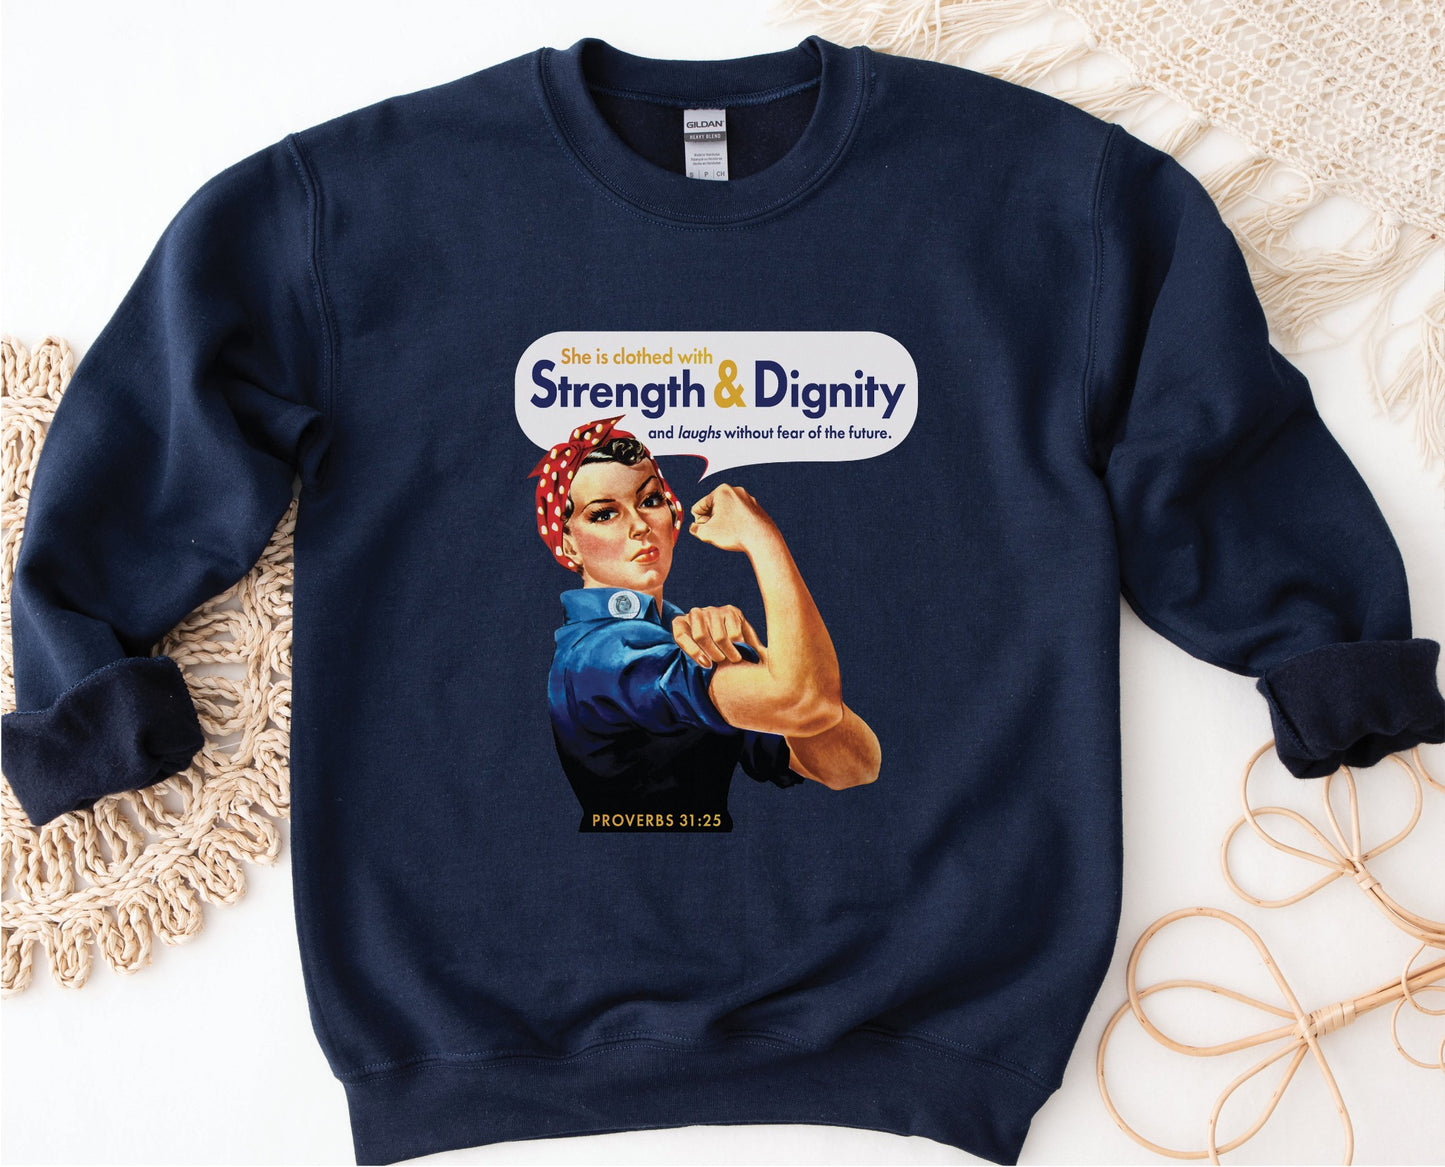 Rosie the Riveter Proverbs 31 Woman Christian aesthetic with iconic vintage female muscle design printed in white red gold and navy blue on cozy navy blue unisex crewneck sweatshirt for women